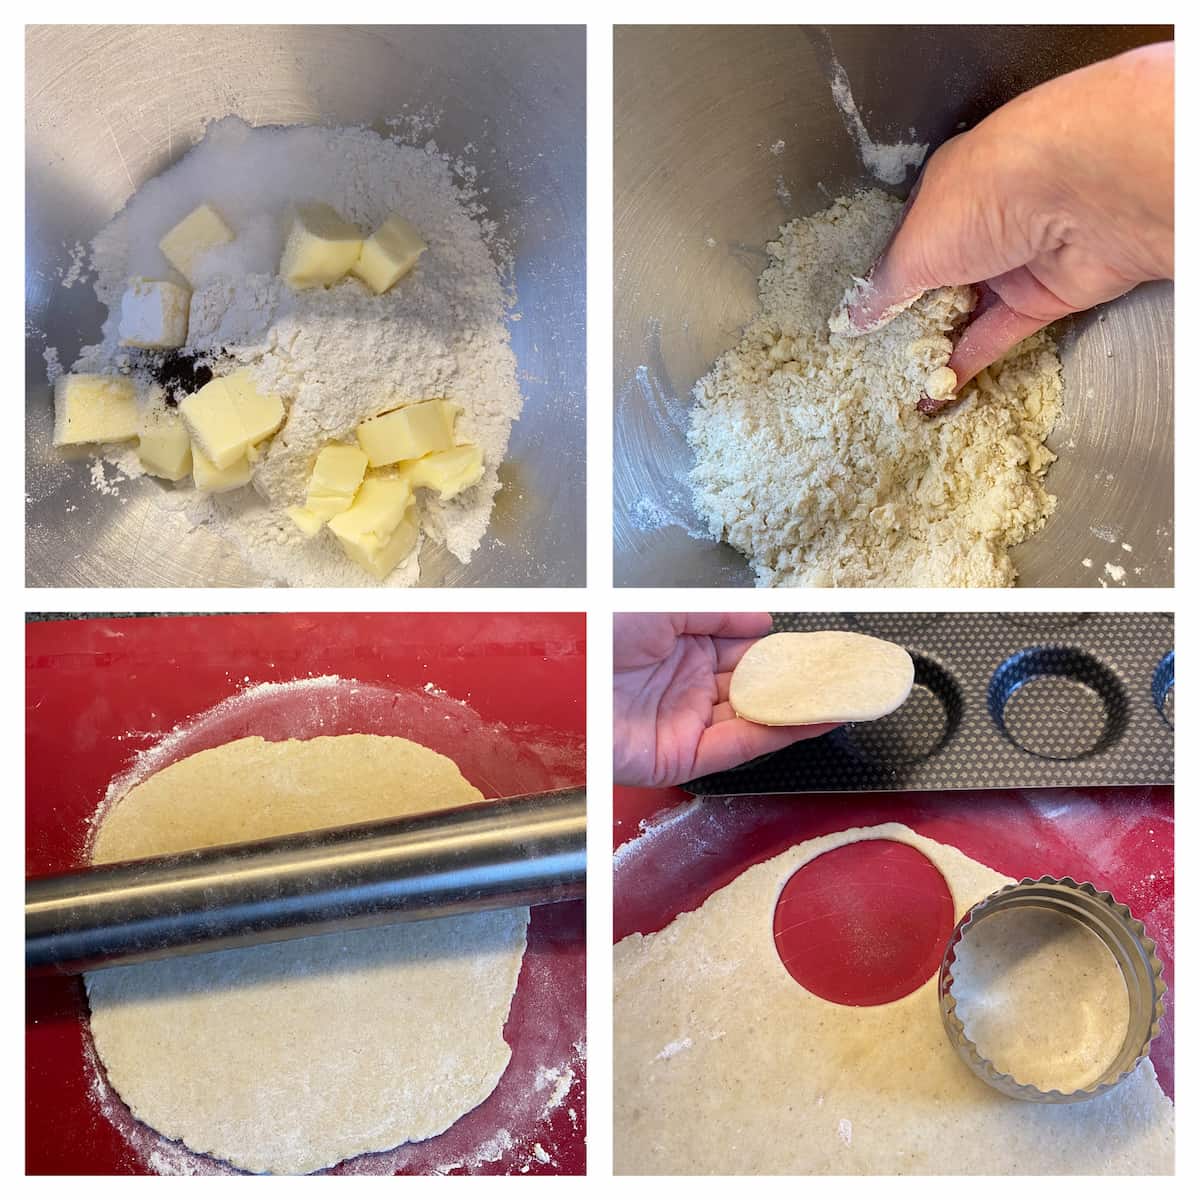 rubbing butter into flour to make a dough then rolling it out and cutting shapes